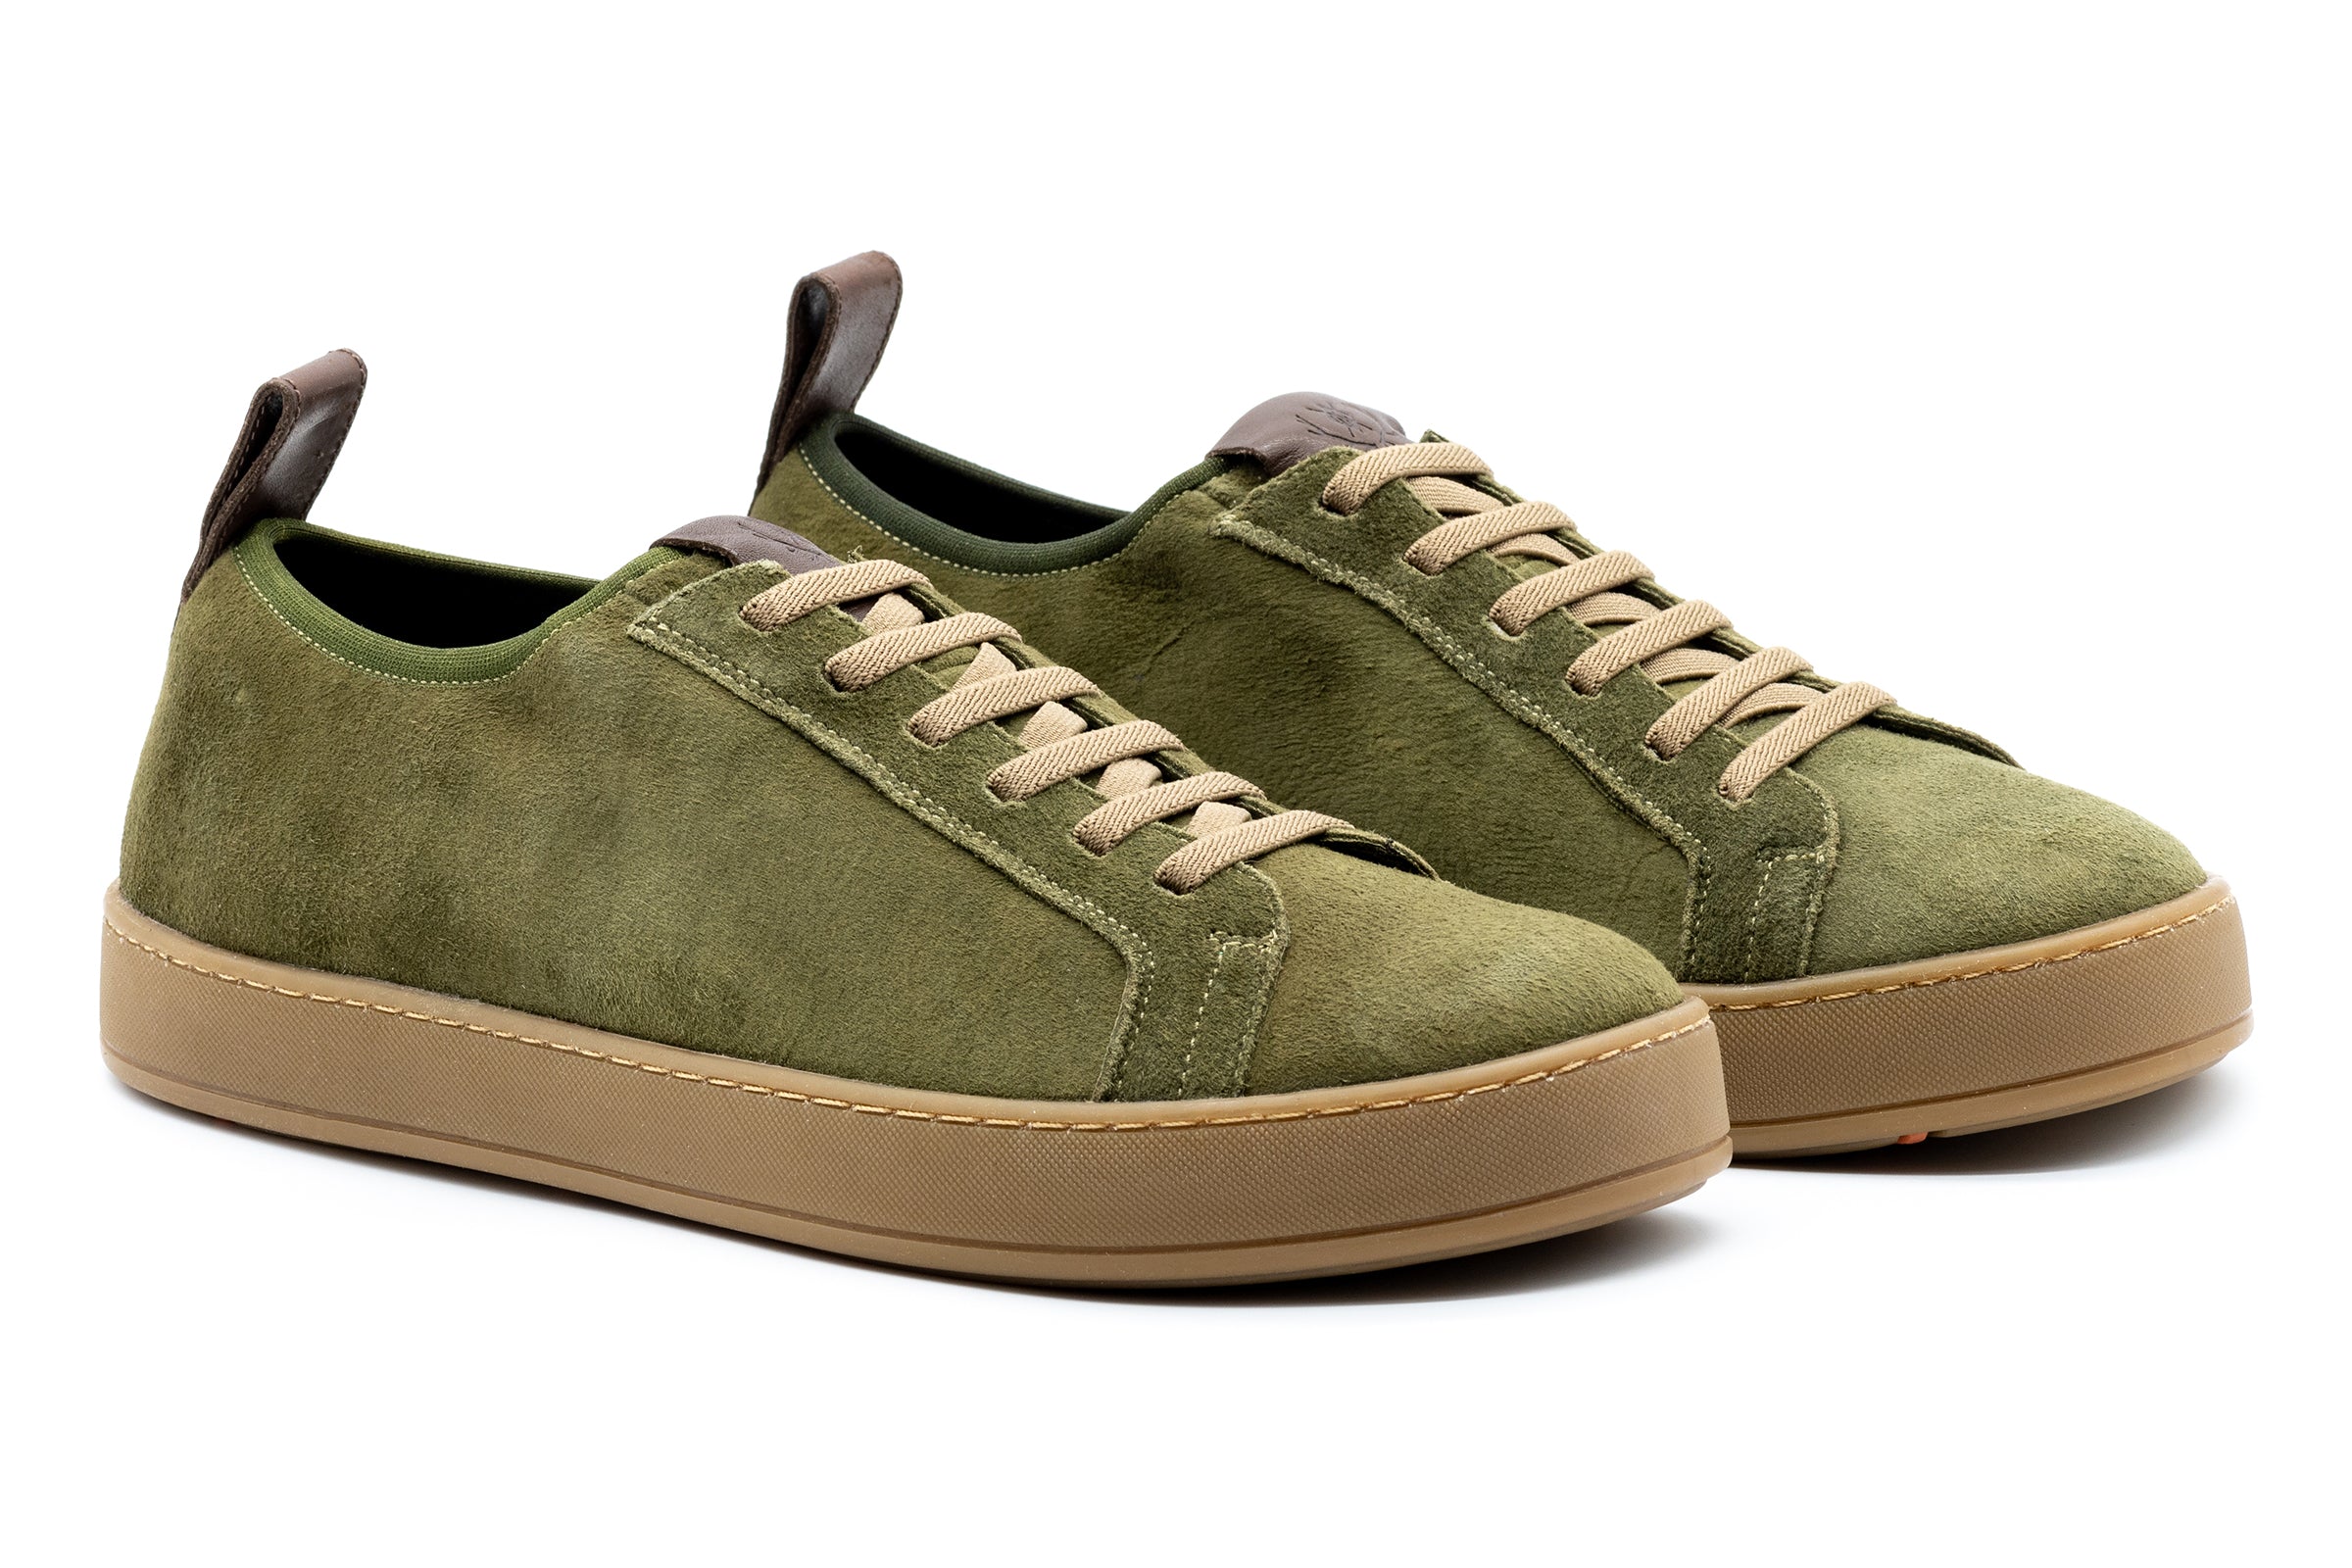 MD Signature Sheep Skin Suede Sneakers - Sage